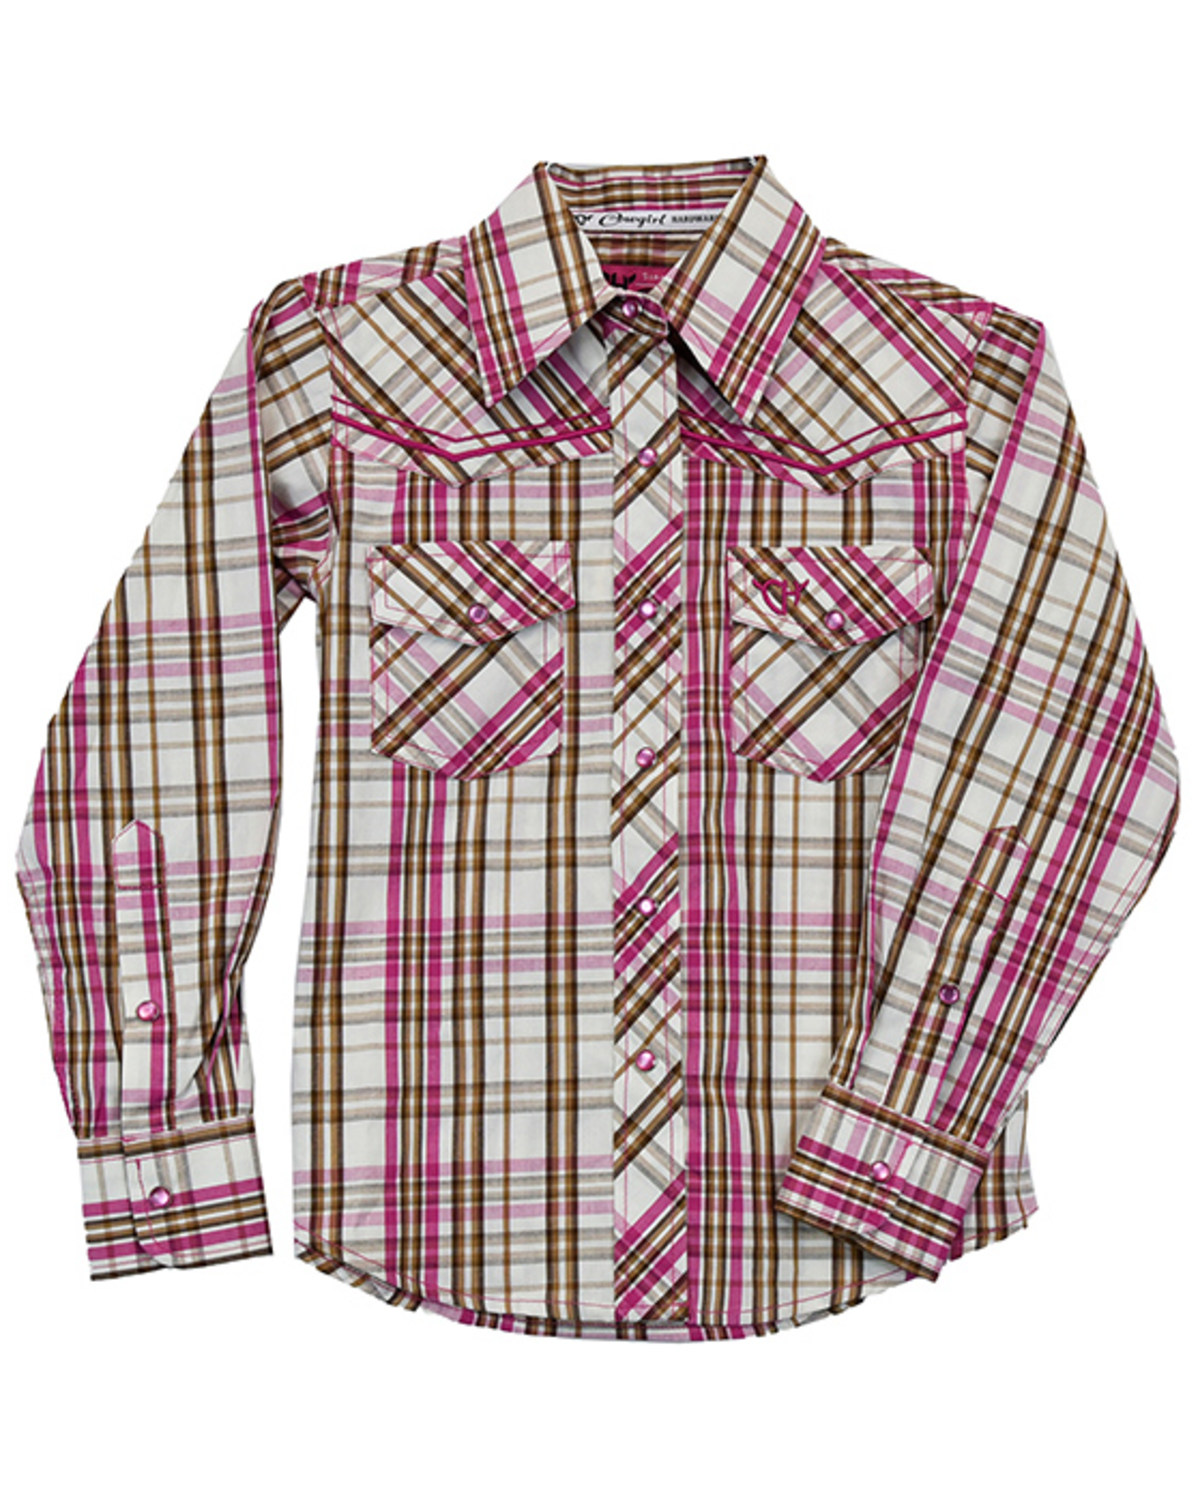 Cowgirl Hardware Toddler Girls' Embroidered Horse Plaid Print Long Sleeve Pearl Snap Western Shirt